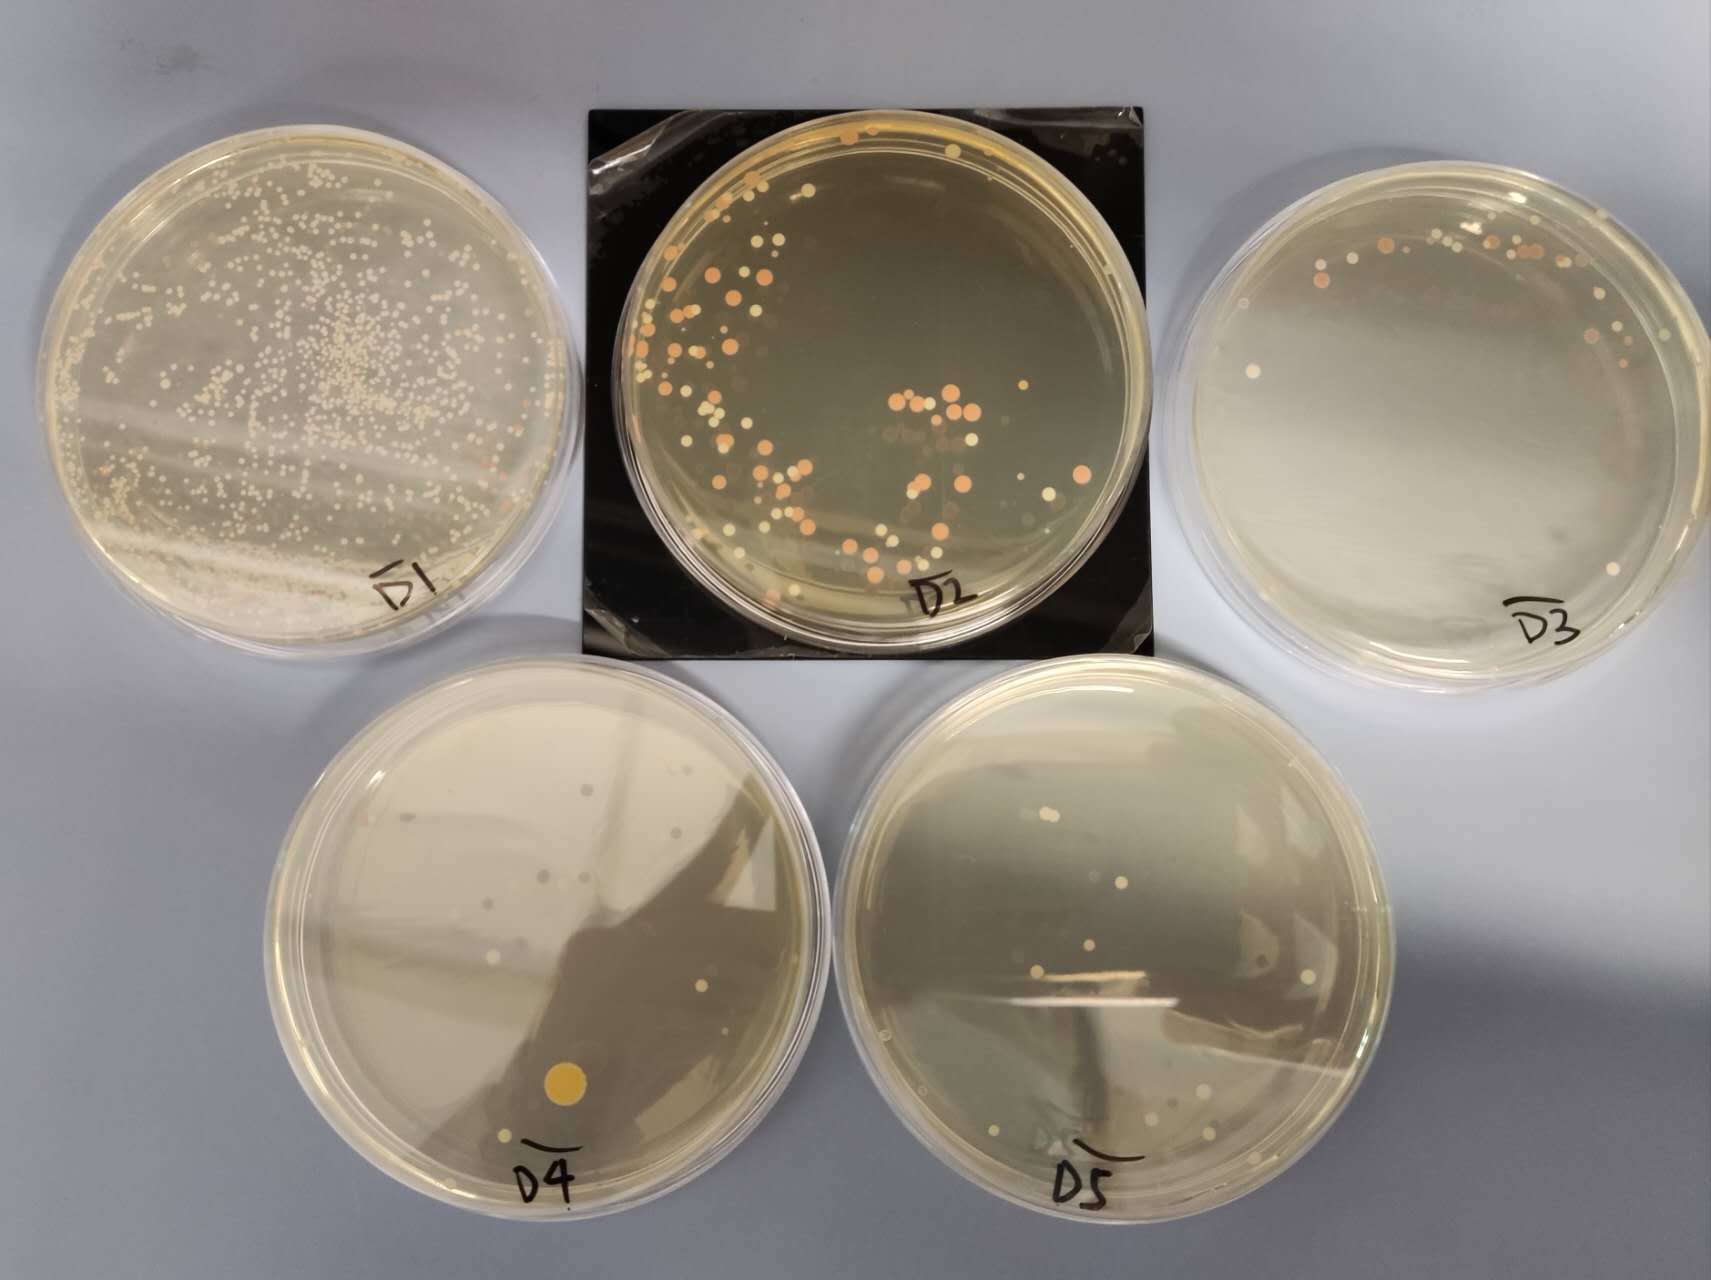 Petri dish with colonies